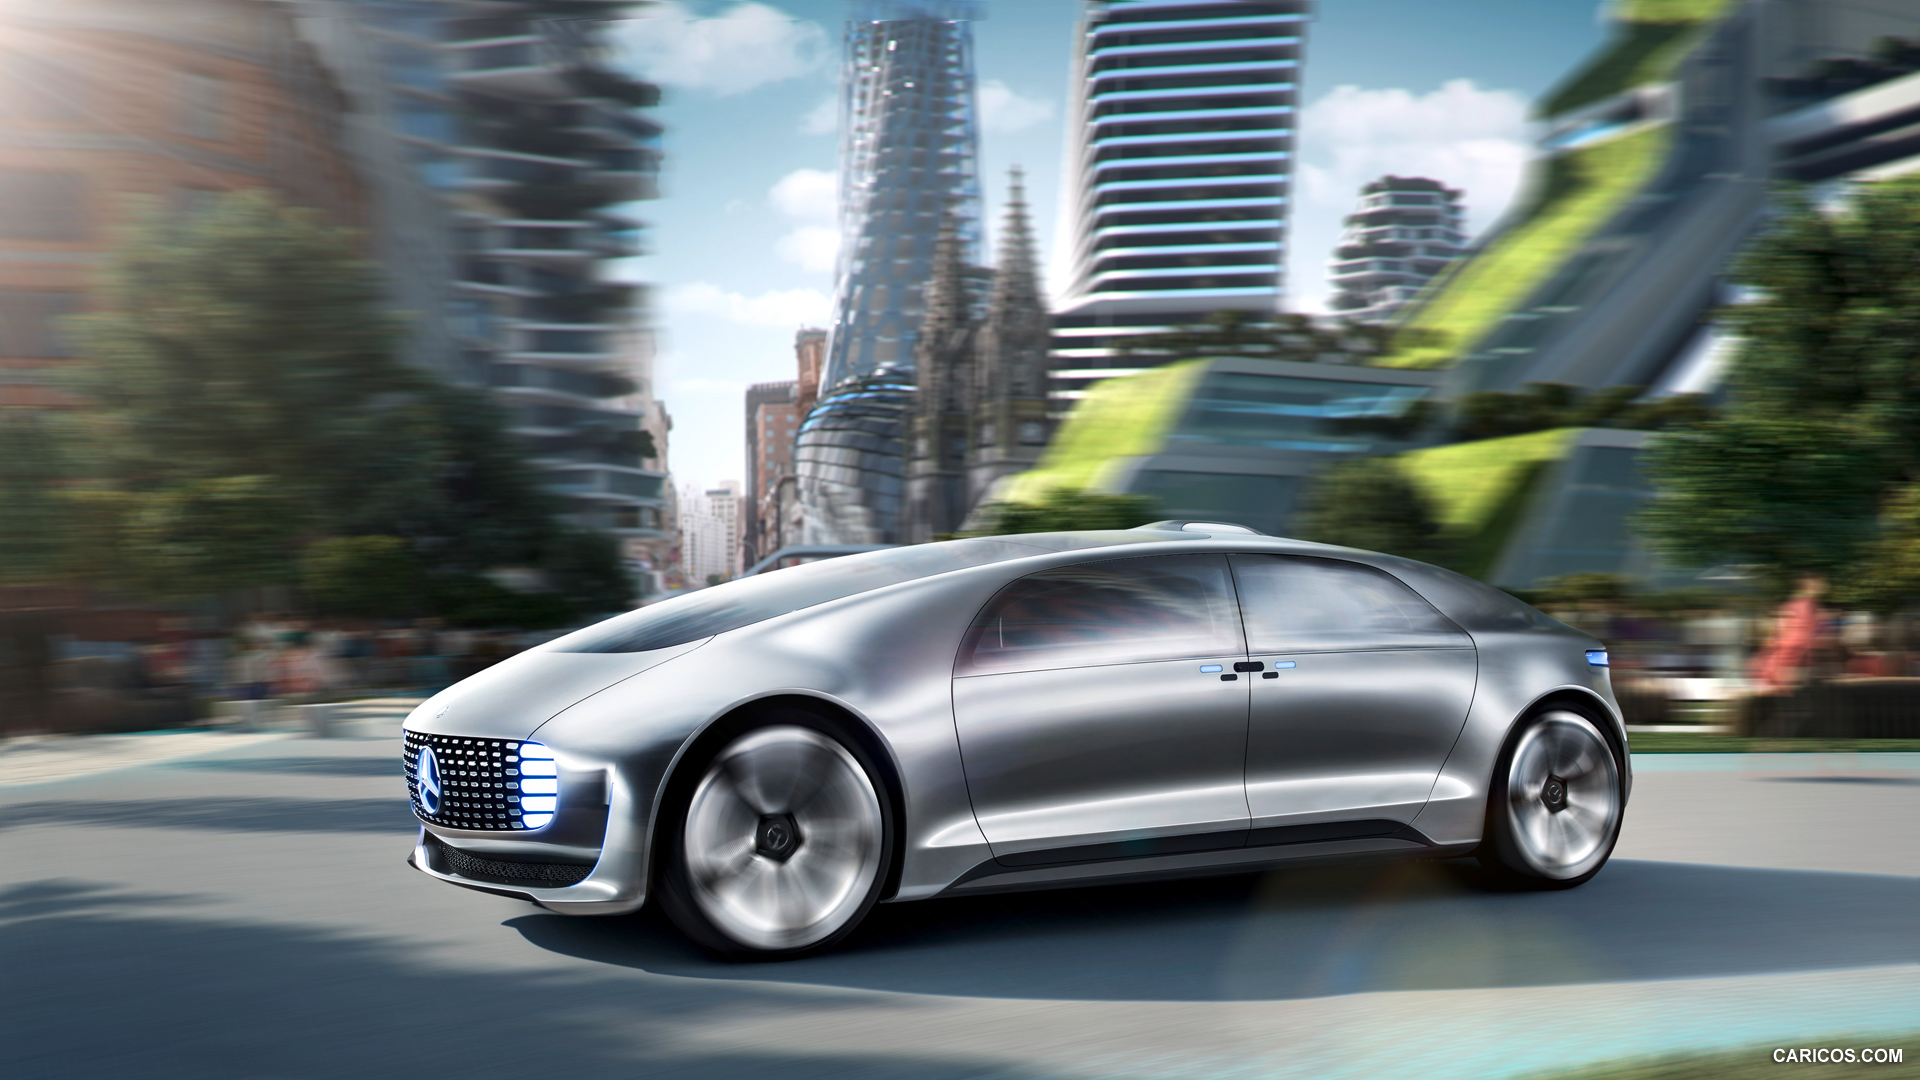 2015 Mercedes-Benz F 015 Luxury in Motion Concept  - Side, #3 of 92